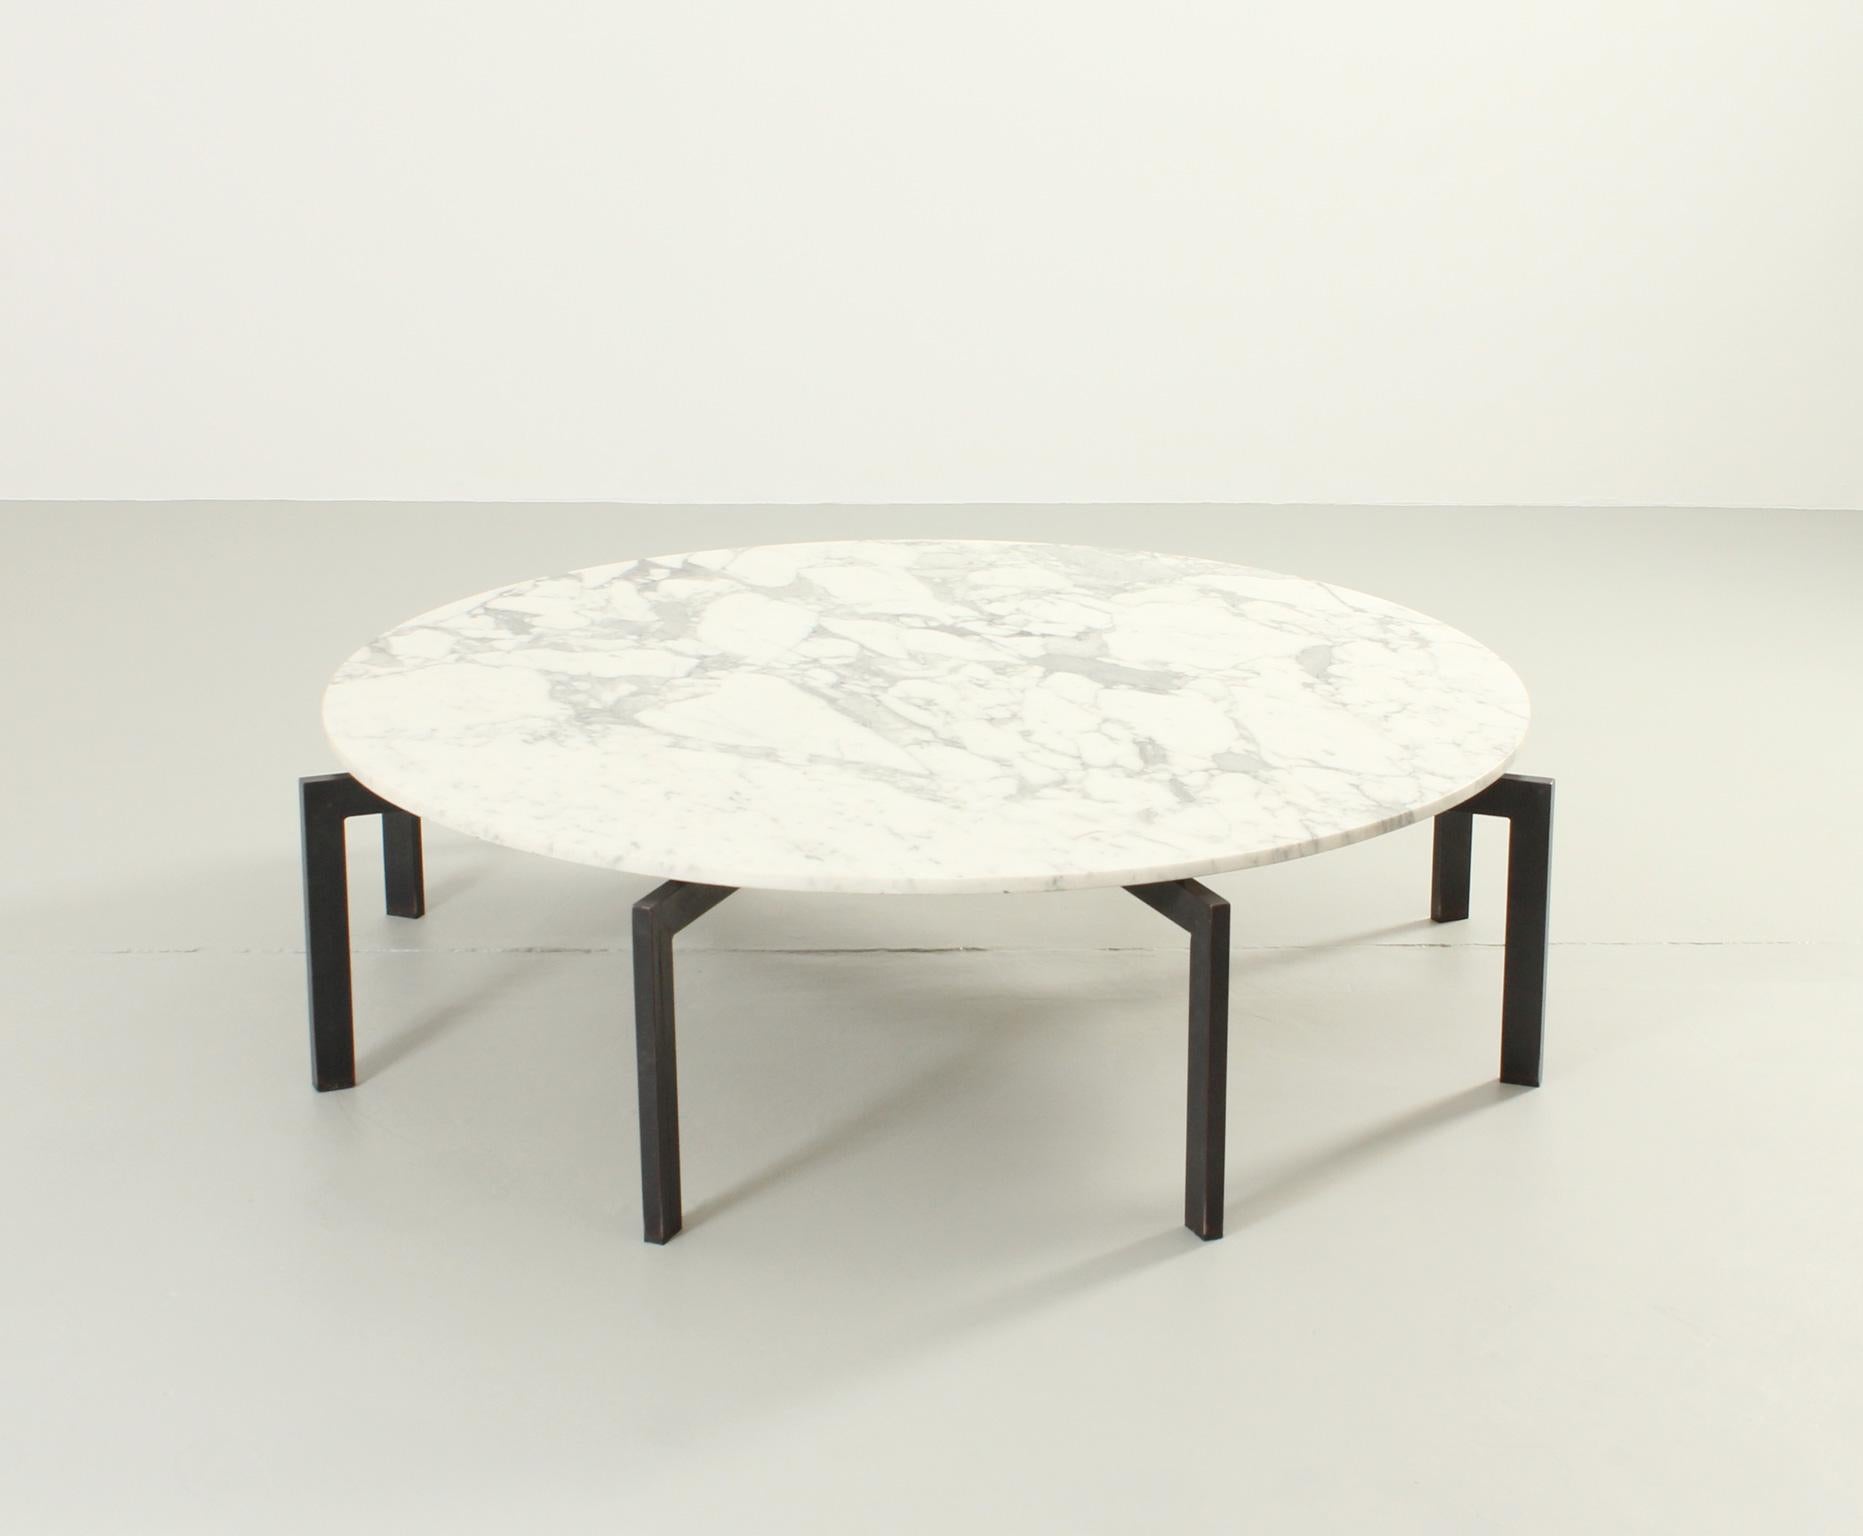 Extra large brutalist coffee table from 1960's, Spain. Black metal base with eight legs that support an Arabescato marble top with 155 Ø cm. Very good condition, the marble has been polished.